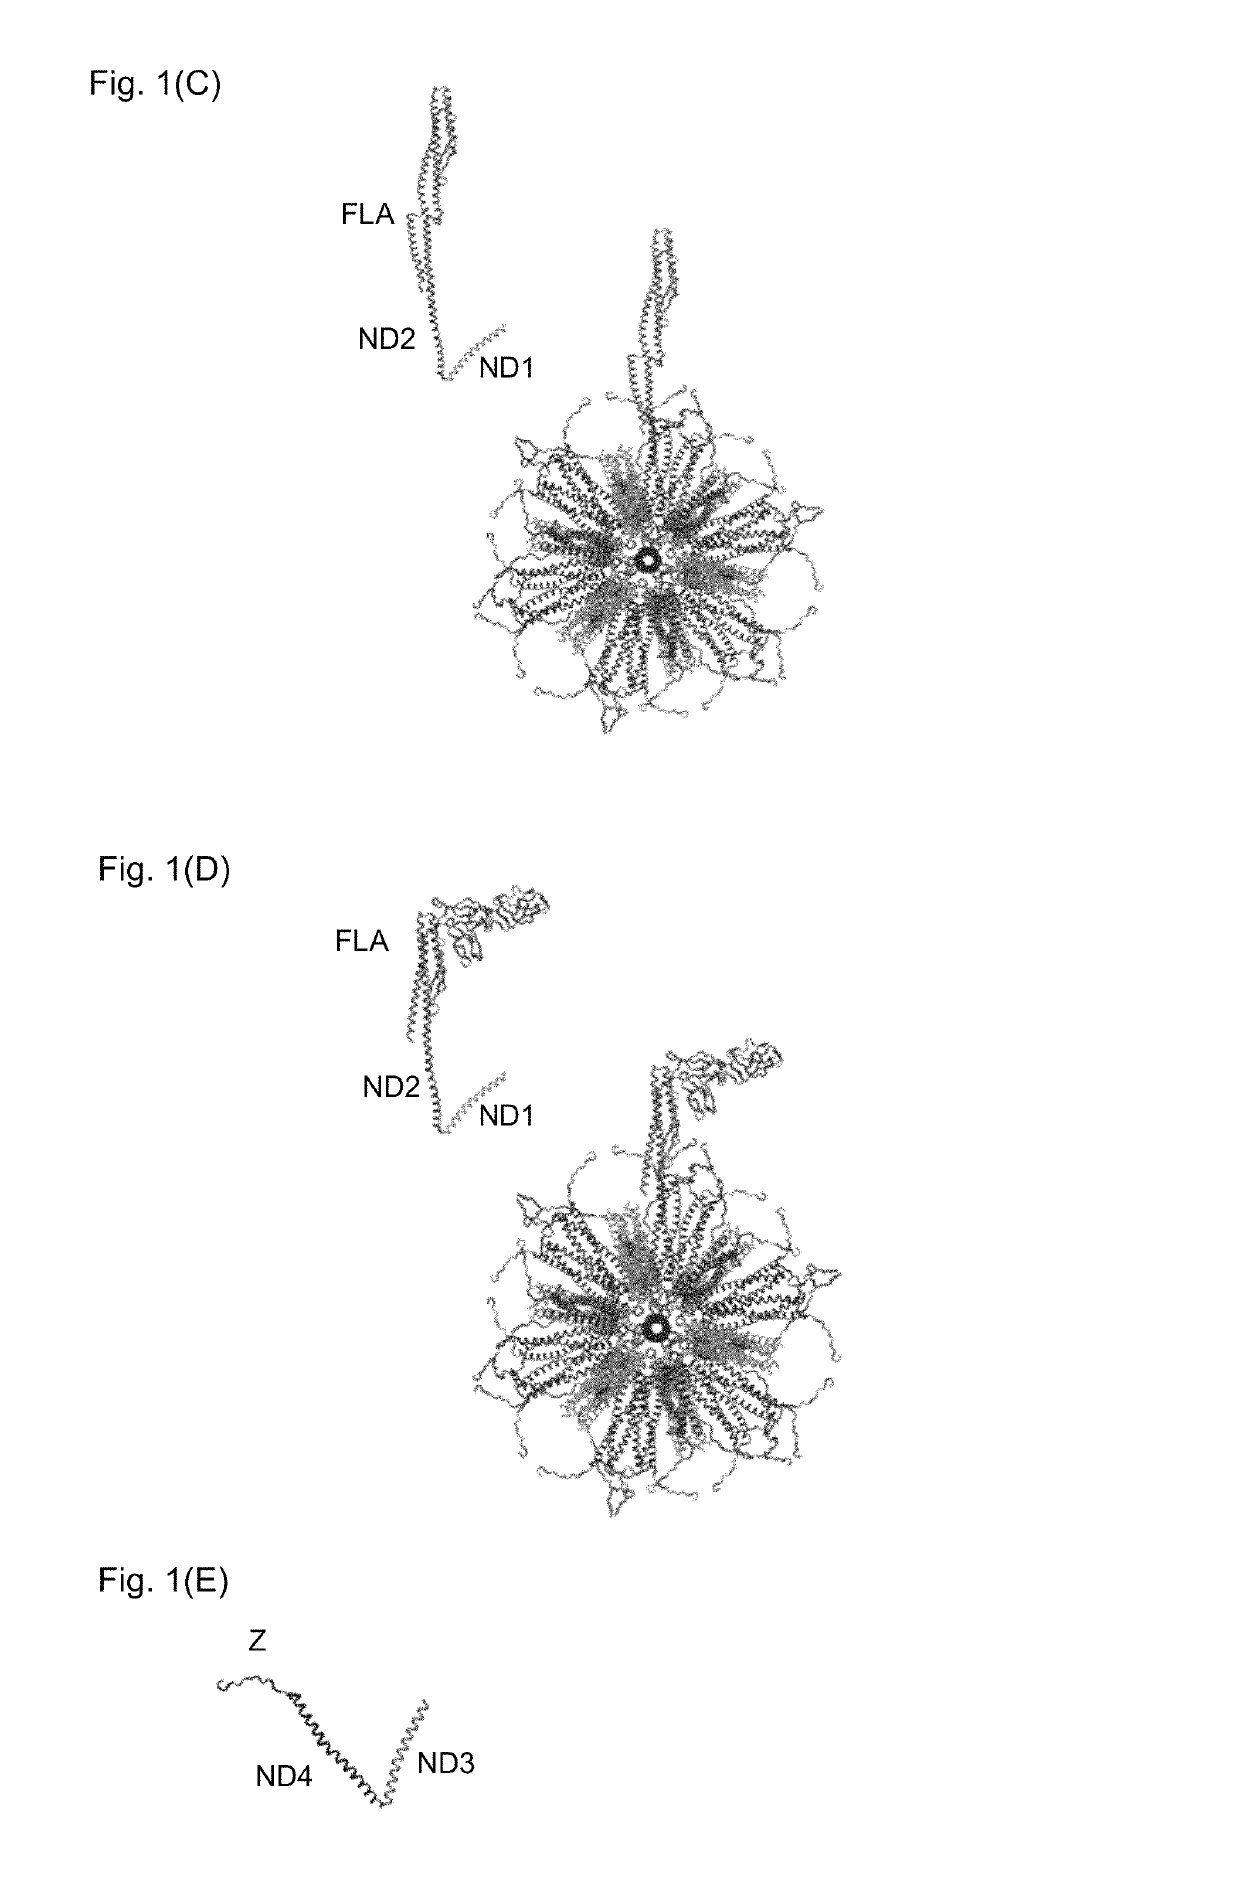 Flagellin-containing protein nanoparticles as a vaccine platform